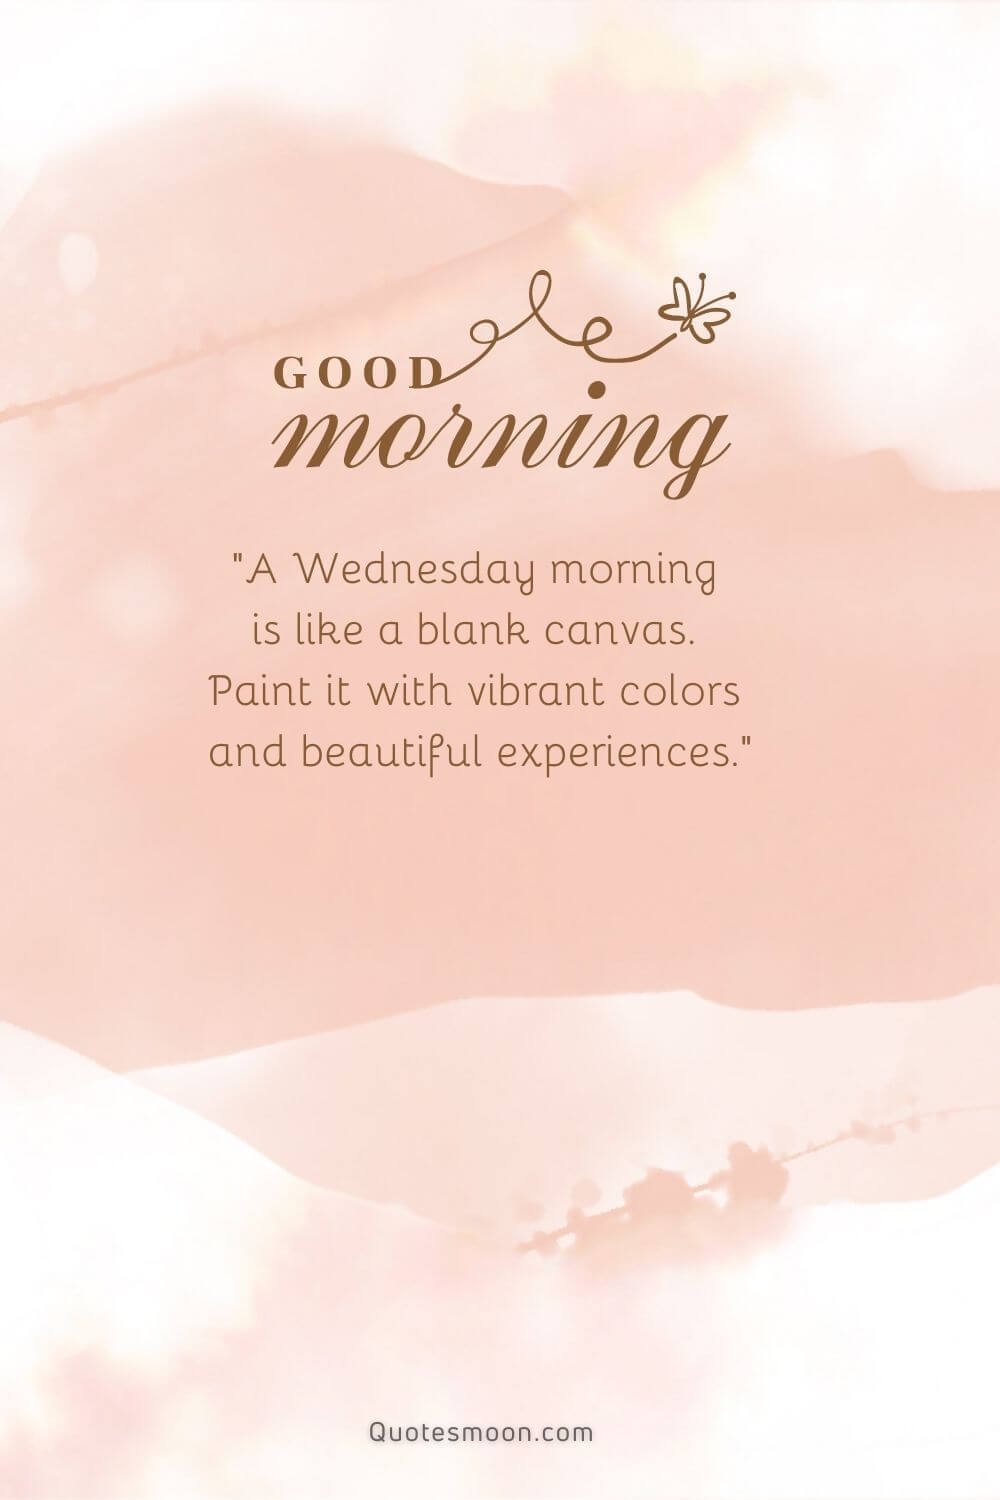 god morning blessings quotes in HD